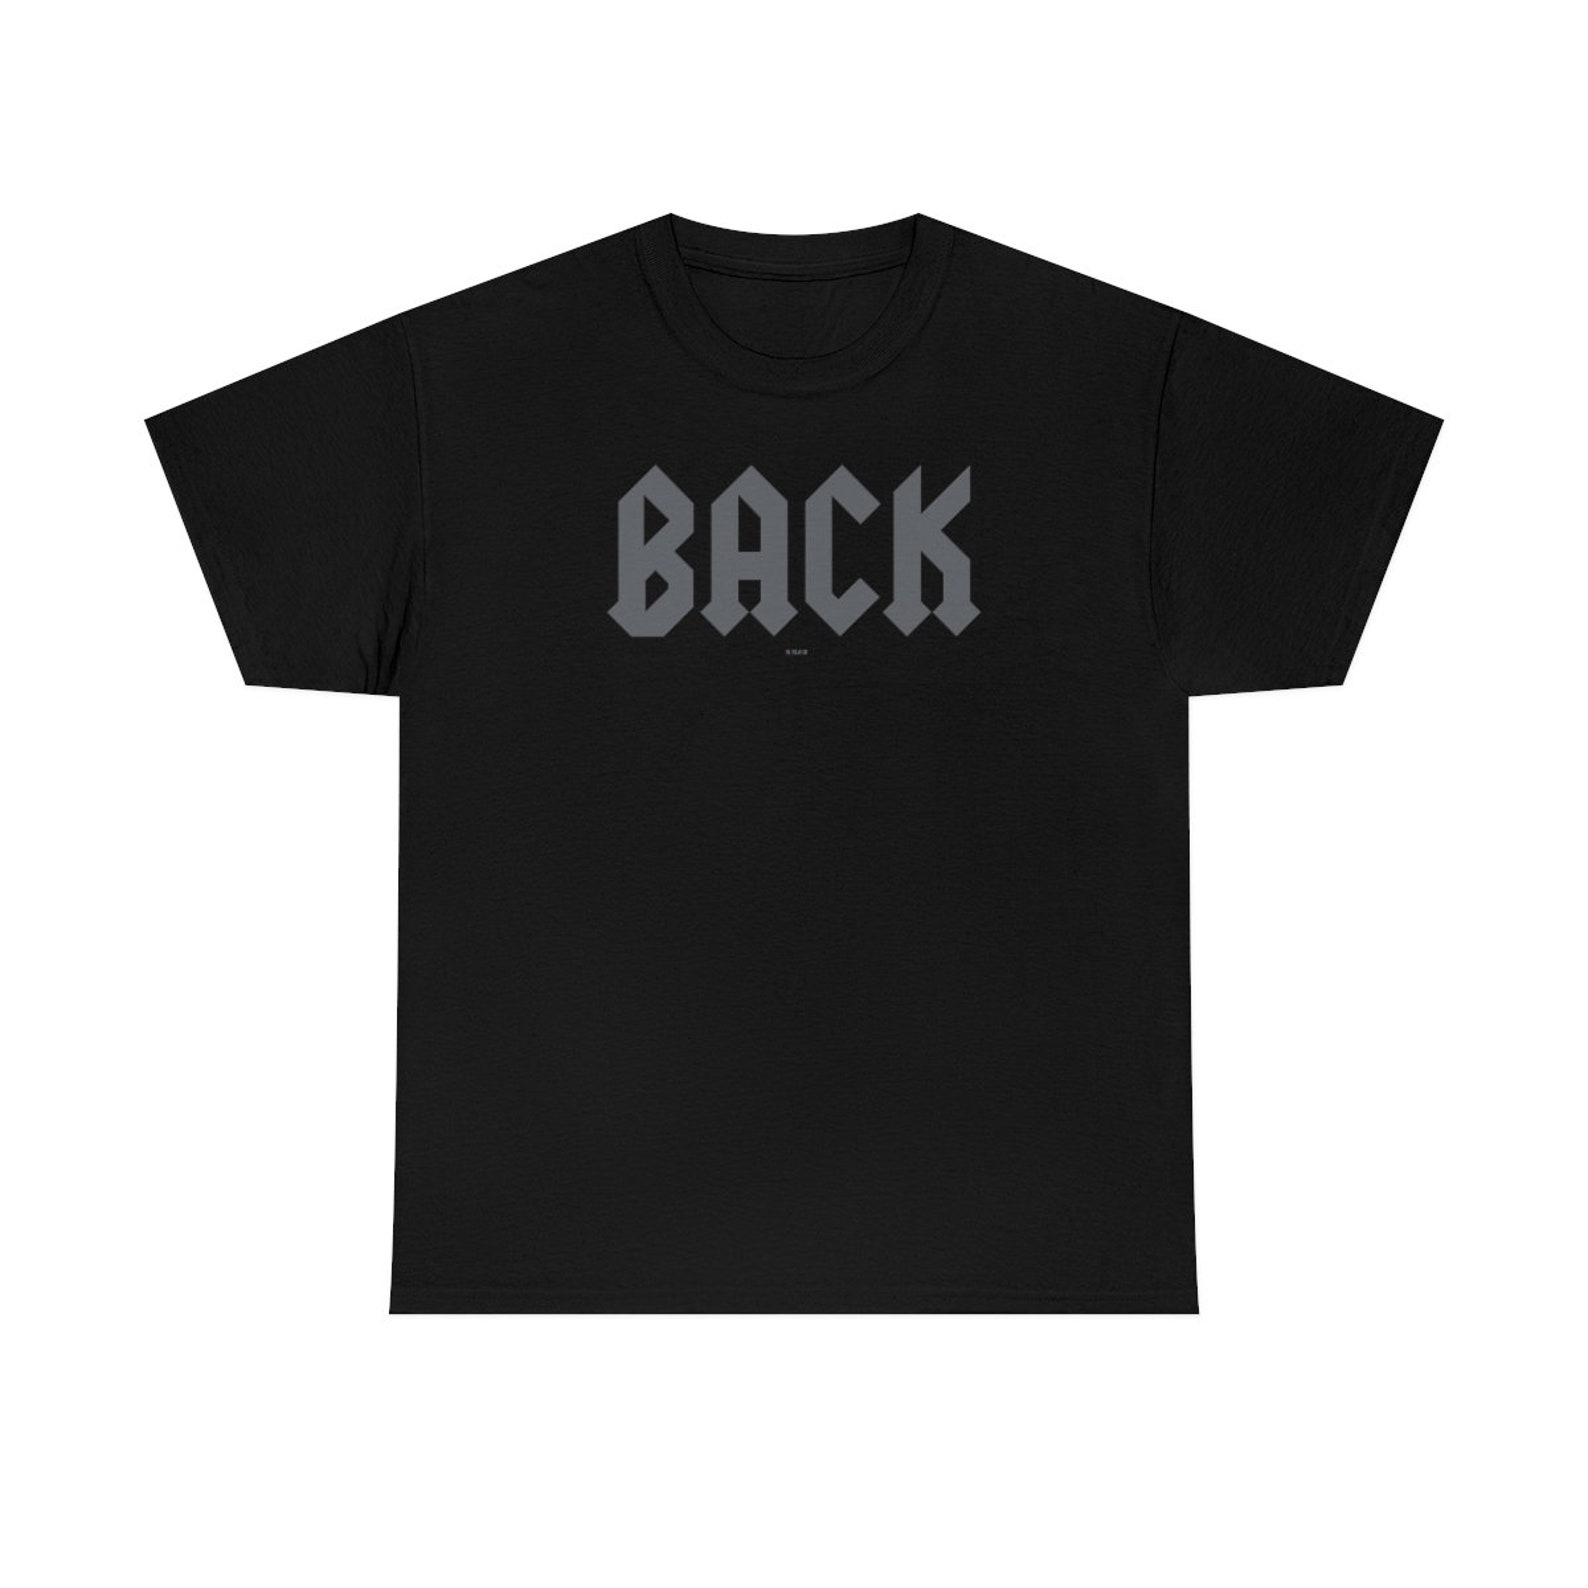 AC/DC Back in Black T-shirt. Brian Johnson. Angus Young. Malcom Young ...